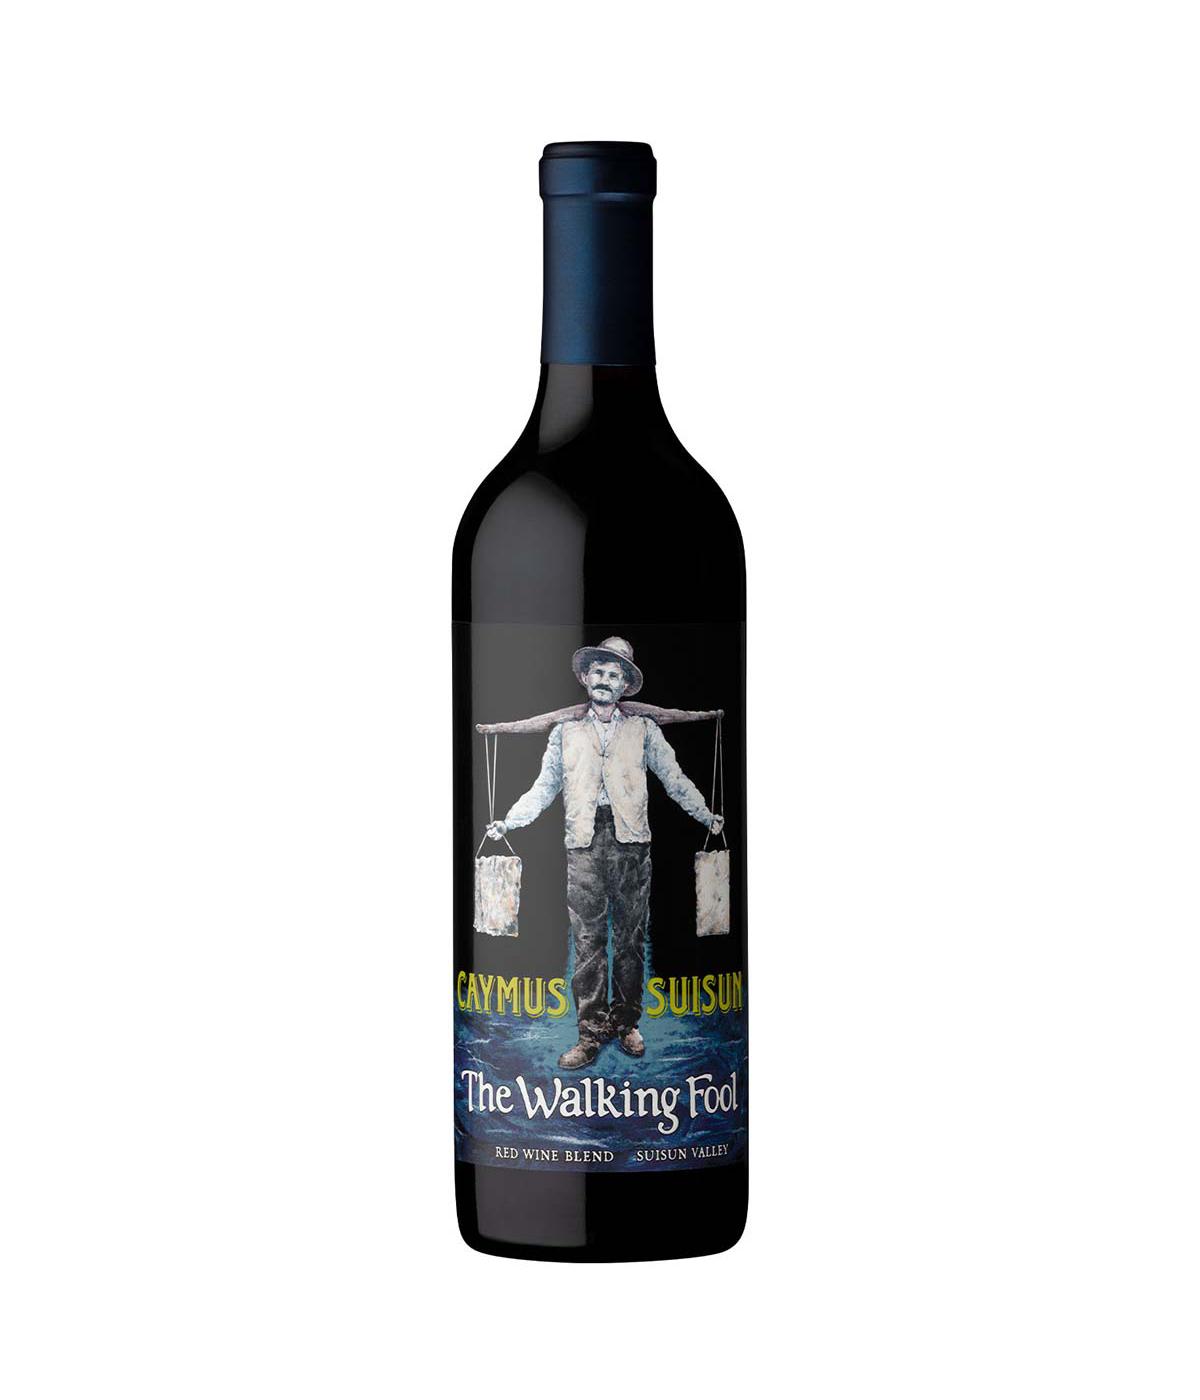 Caymus Suisun The Walking Fool Red Blend; image 1 of 3